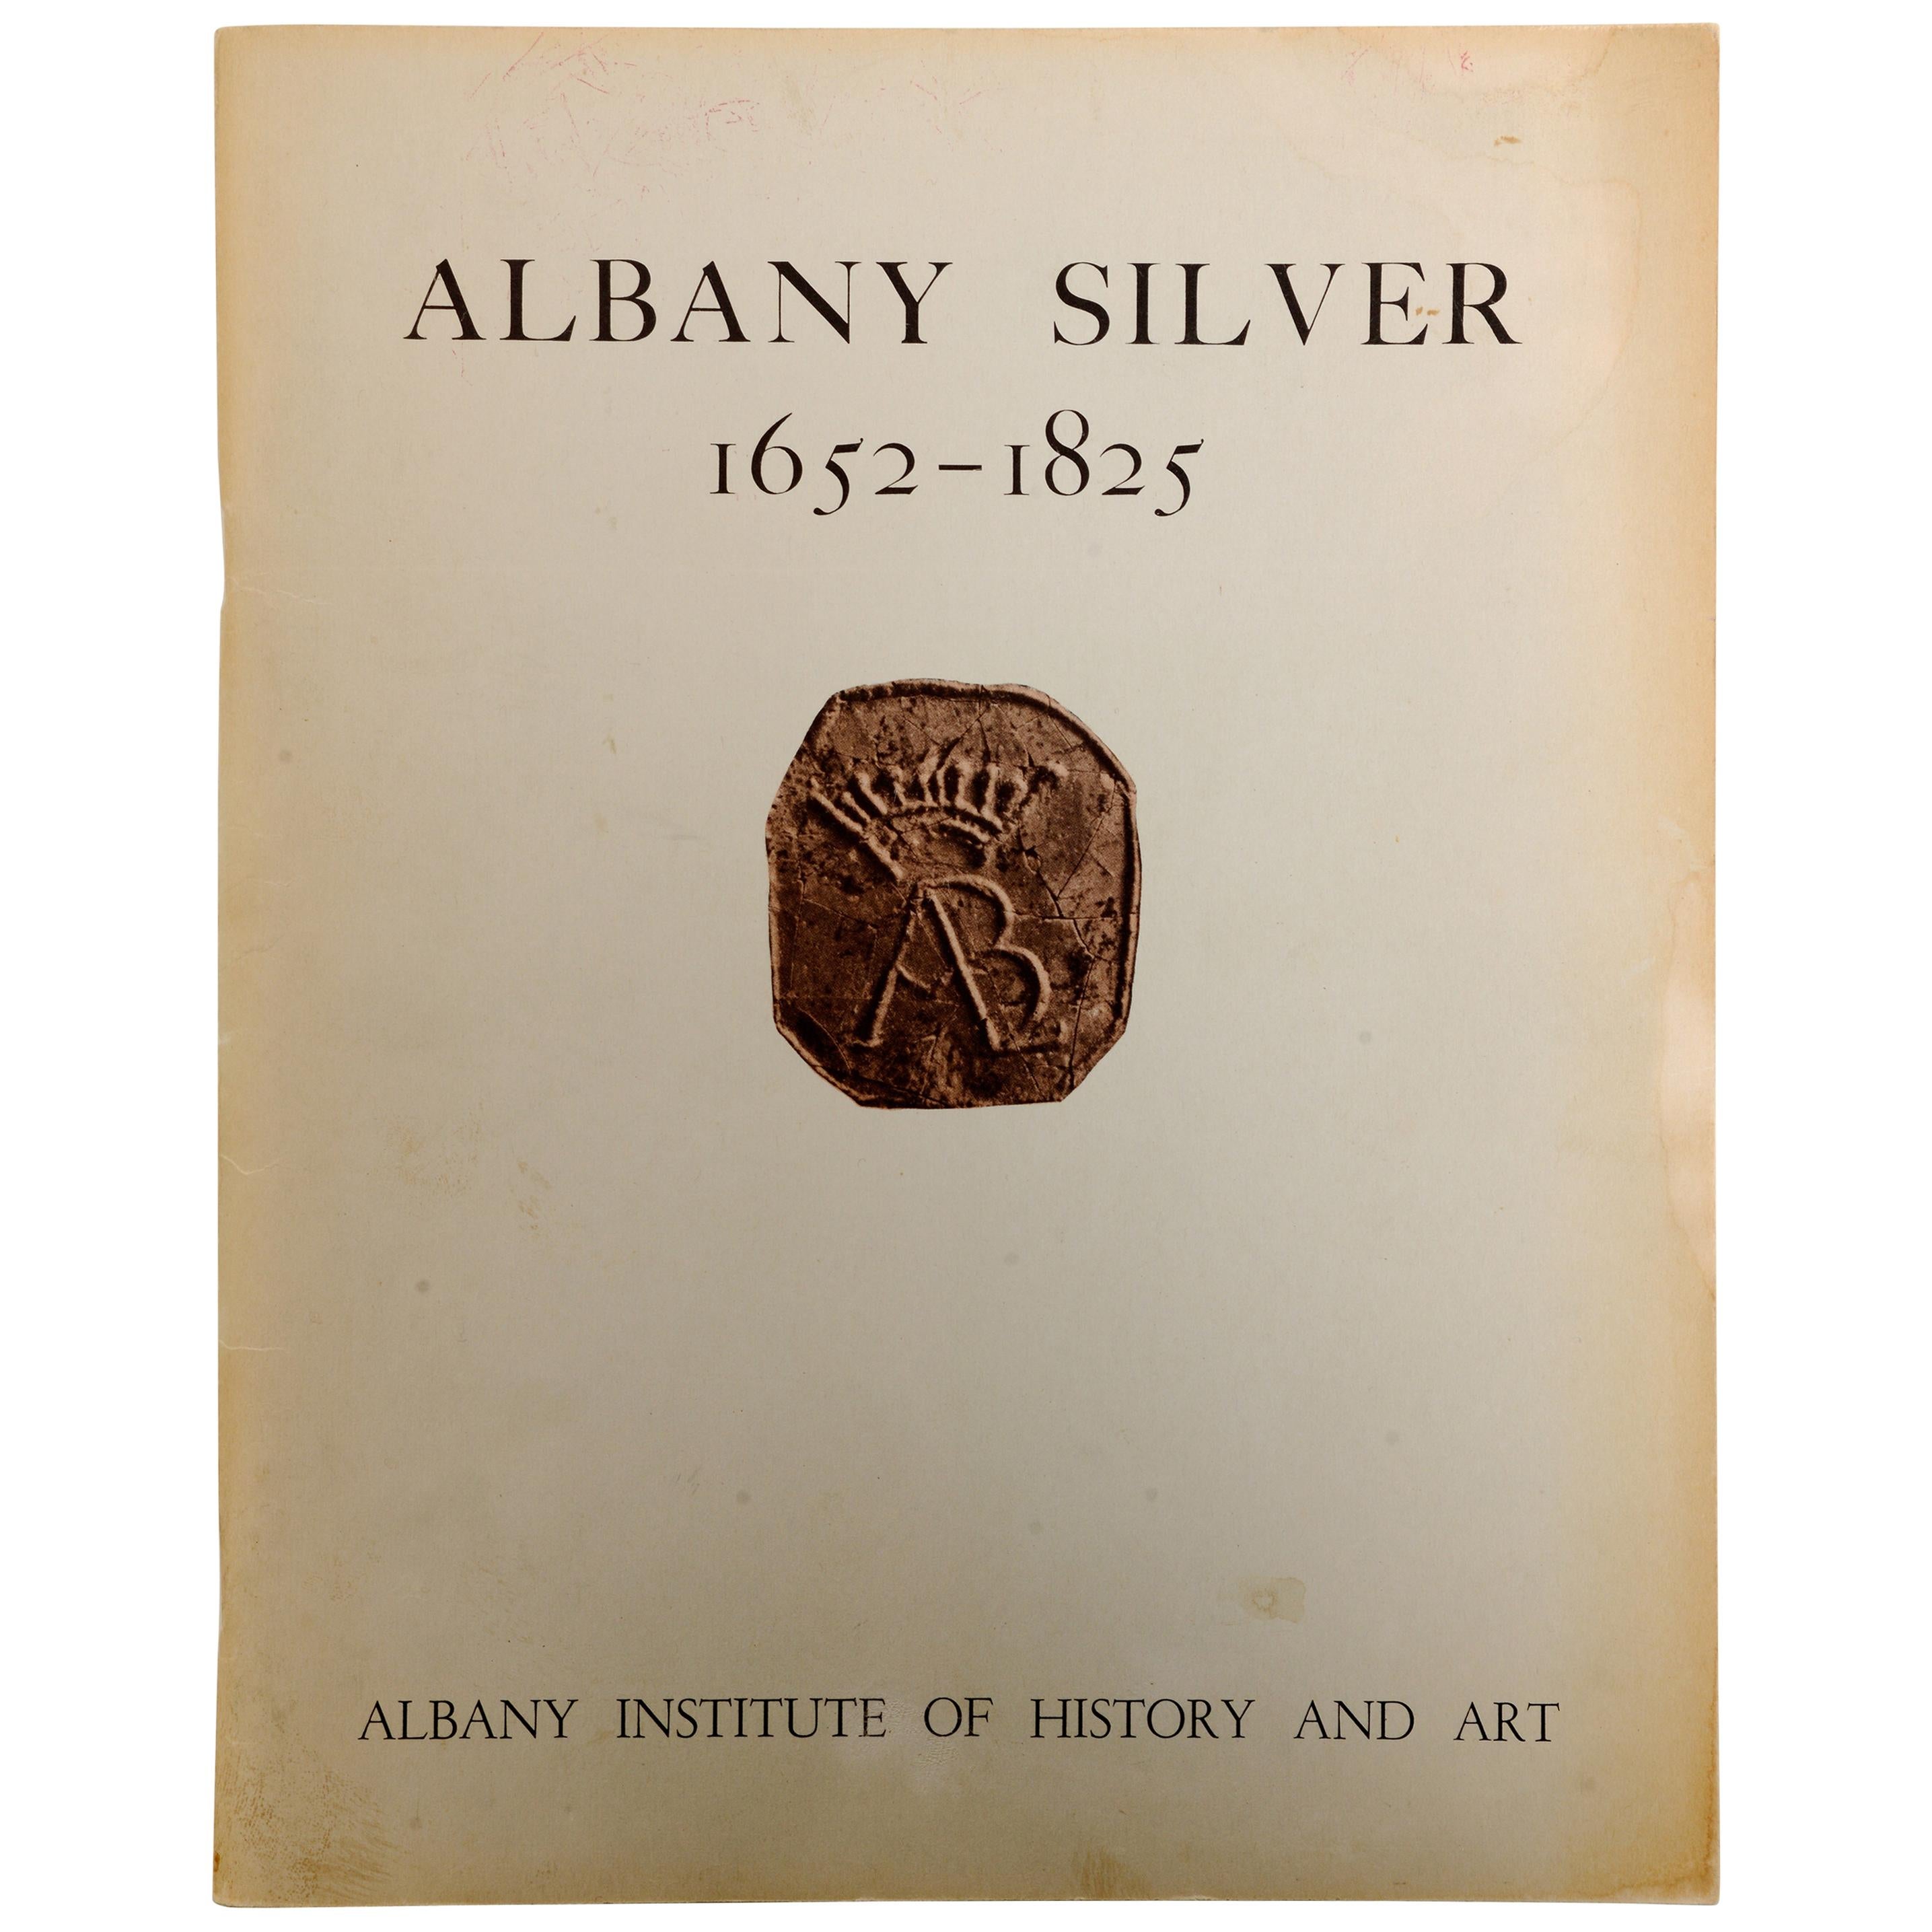 Albany Silver 1652-1825 by Norman Rice, First Edition